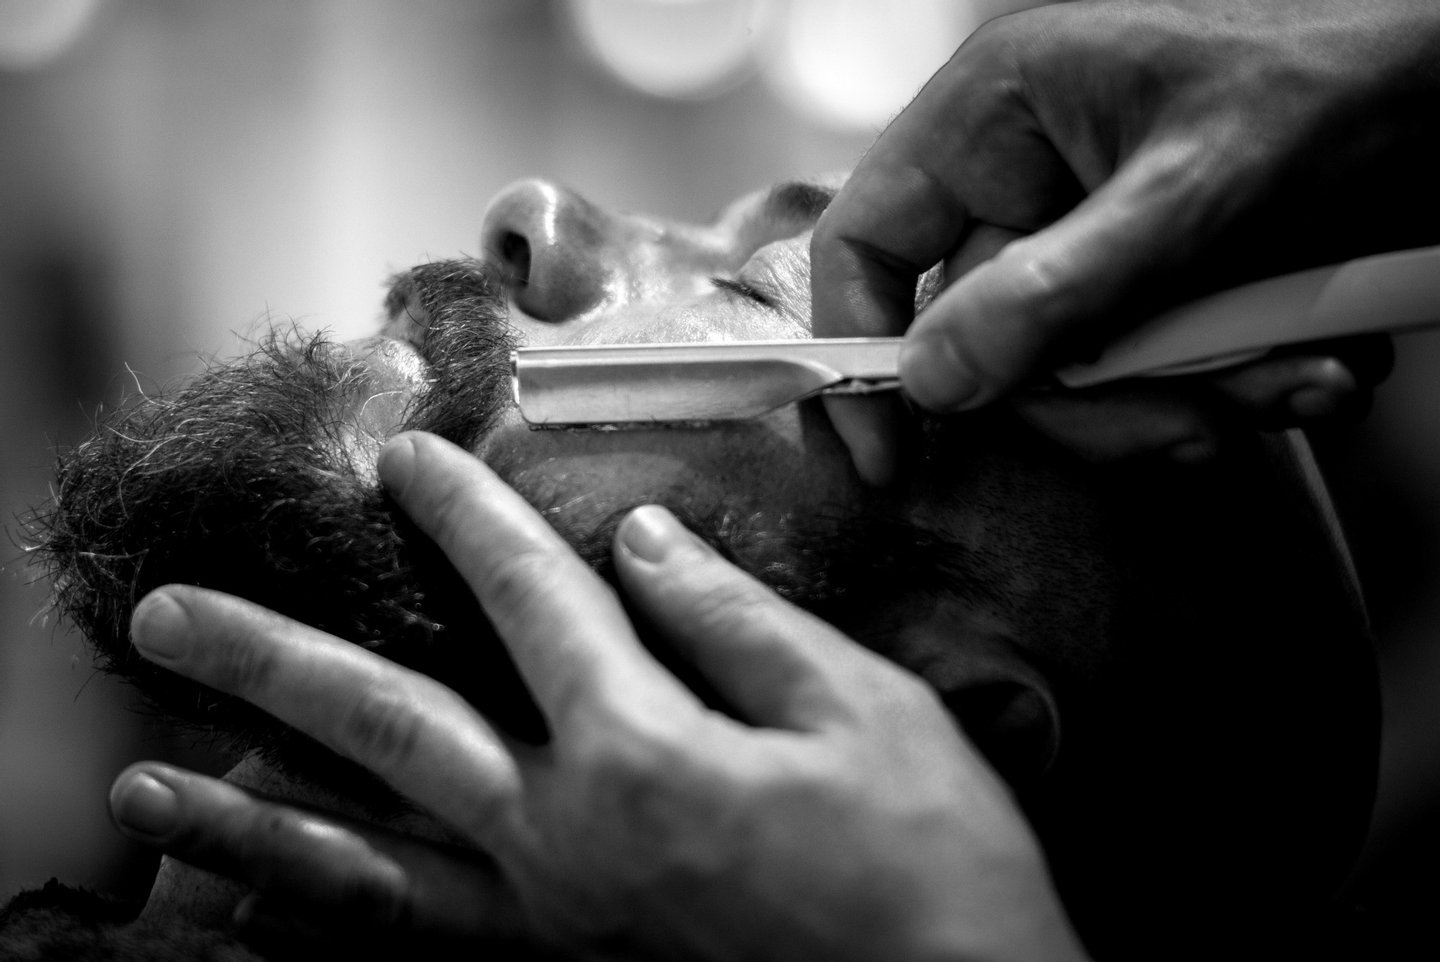 MANCHESTER, ENGLAND - APRIL 29: (EDITORS NOTE: This image has been converted to black and white. Colour version available upon request.) Barber Ricky Trim wet shaves a customer in Manchester's Barber Barber, a 'gentleman's saloon' style male barber shop, on April 29, 2015 in Manchester, England. According to owner Johnny the Baba, Barber Barber is the UK's finest barber shop. The shop for 'gentleman and scoundrels' takes a traditional approach to male grooming, and offers services such as wet shaving, beard scultping and highly skilled hair styling. The shop also offers complimentary drinks and cigars to it's customers and operates a 'gentlemen only' door policy. (Photo by Christopher Furlong/Getty Images)